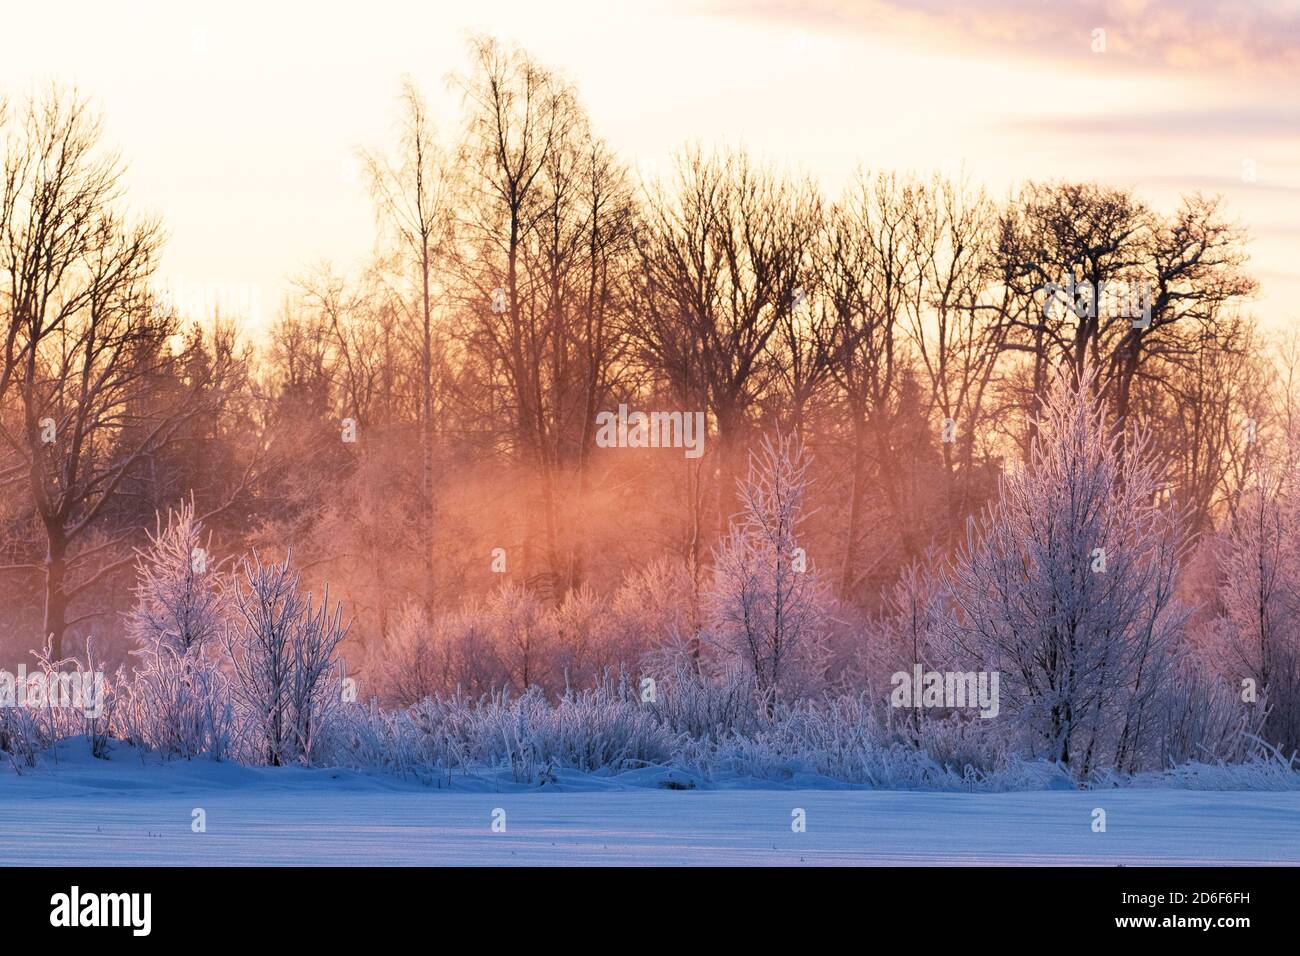 Stunning winter landscape during pink, foggy and frosty cold weather sunrise in a winter wonderland, Estonia, Northern Europe. Stock Photo